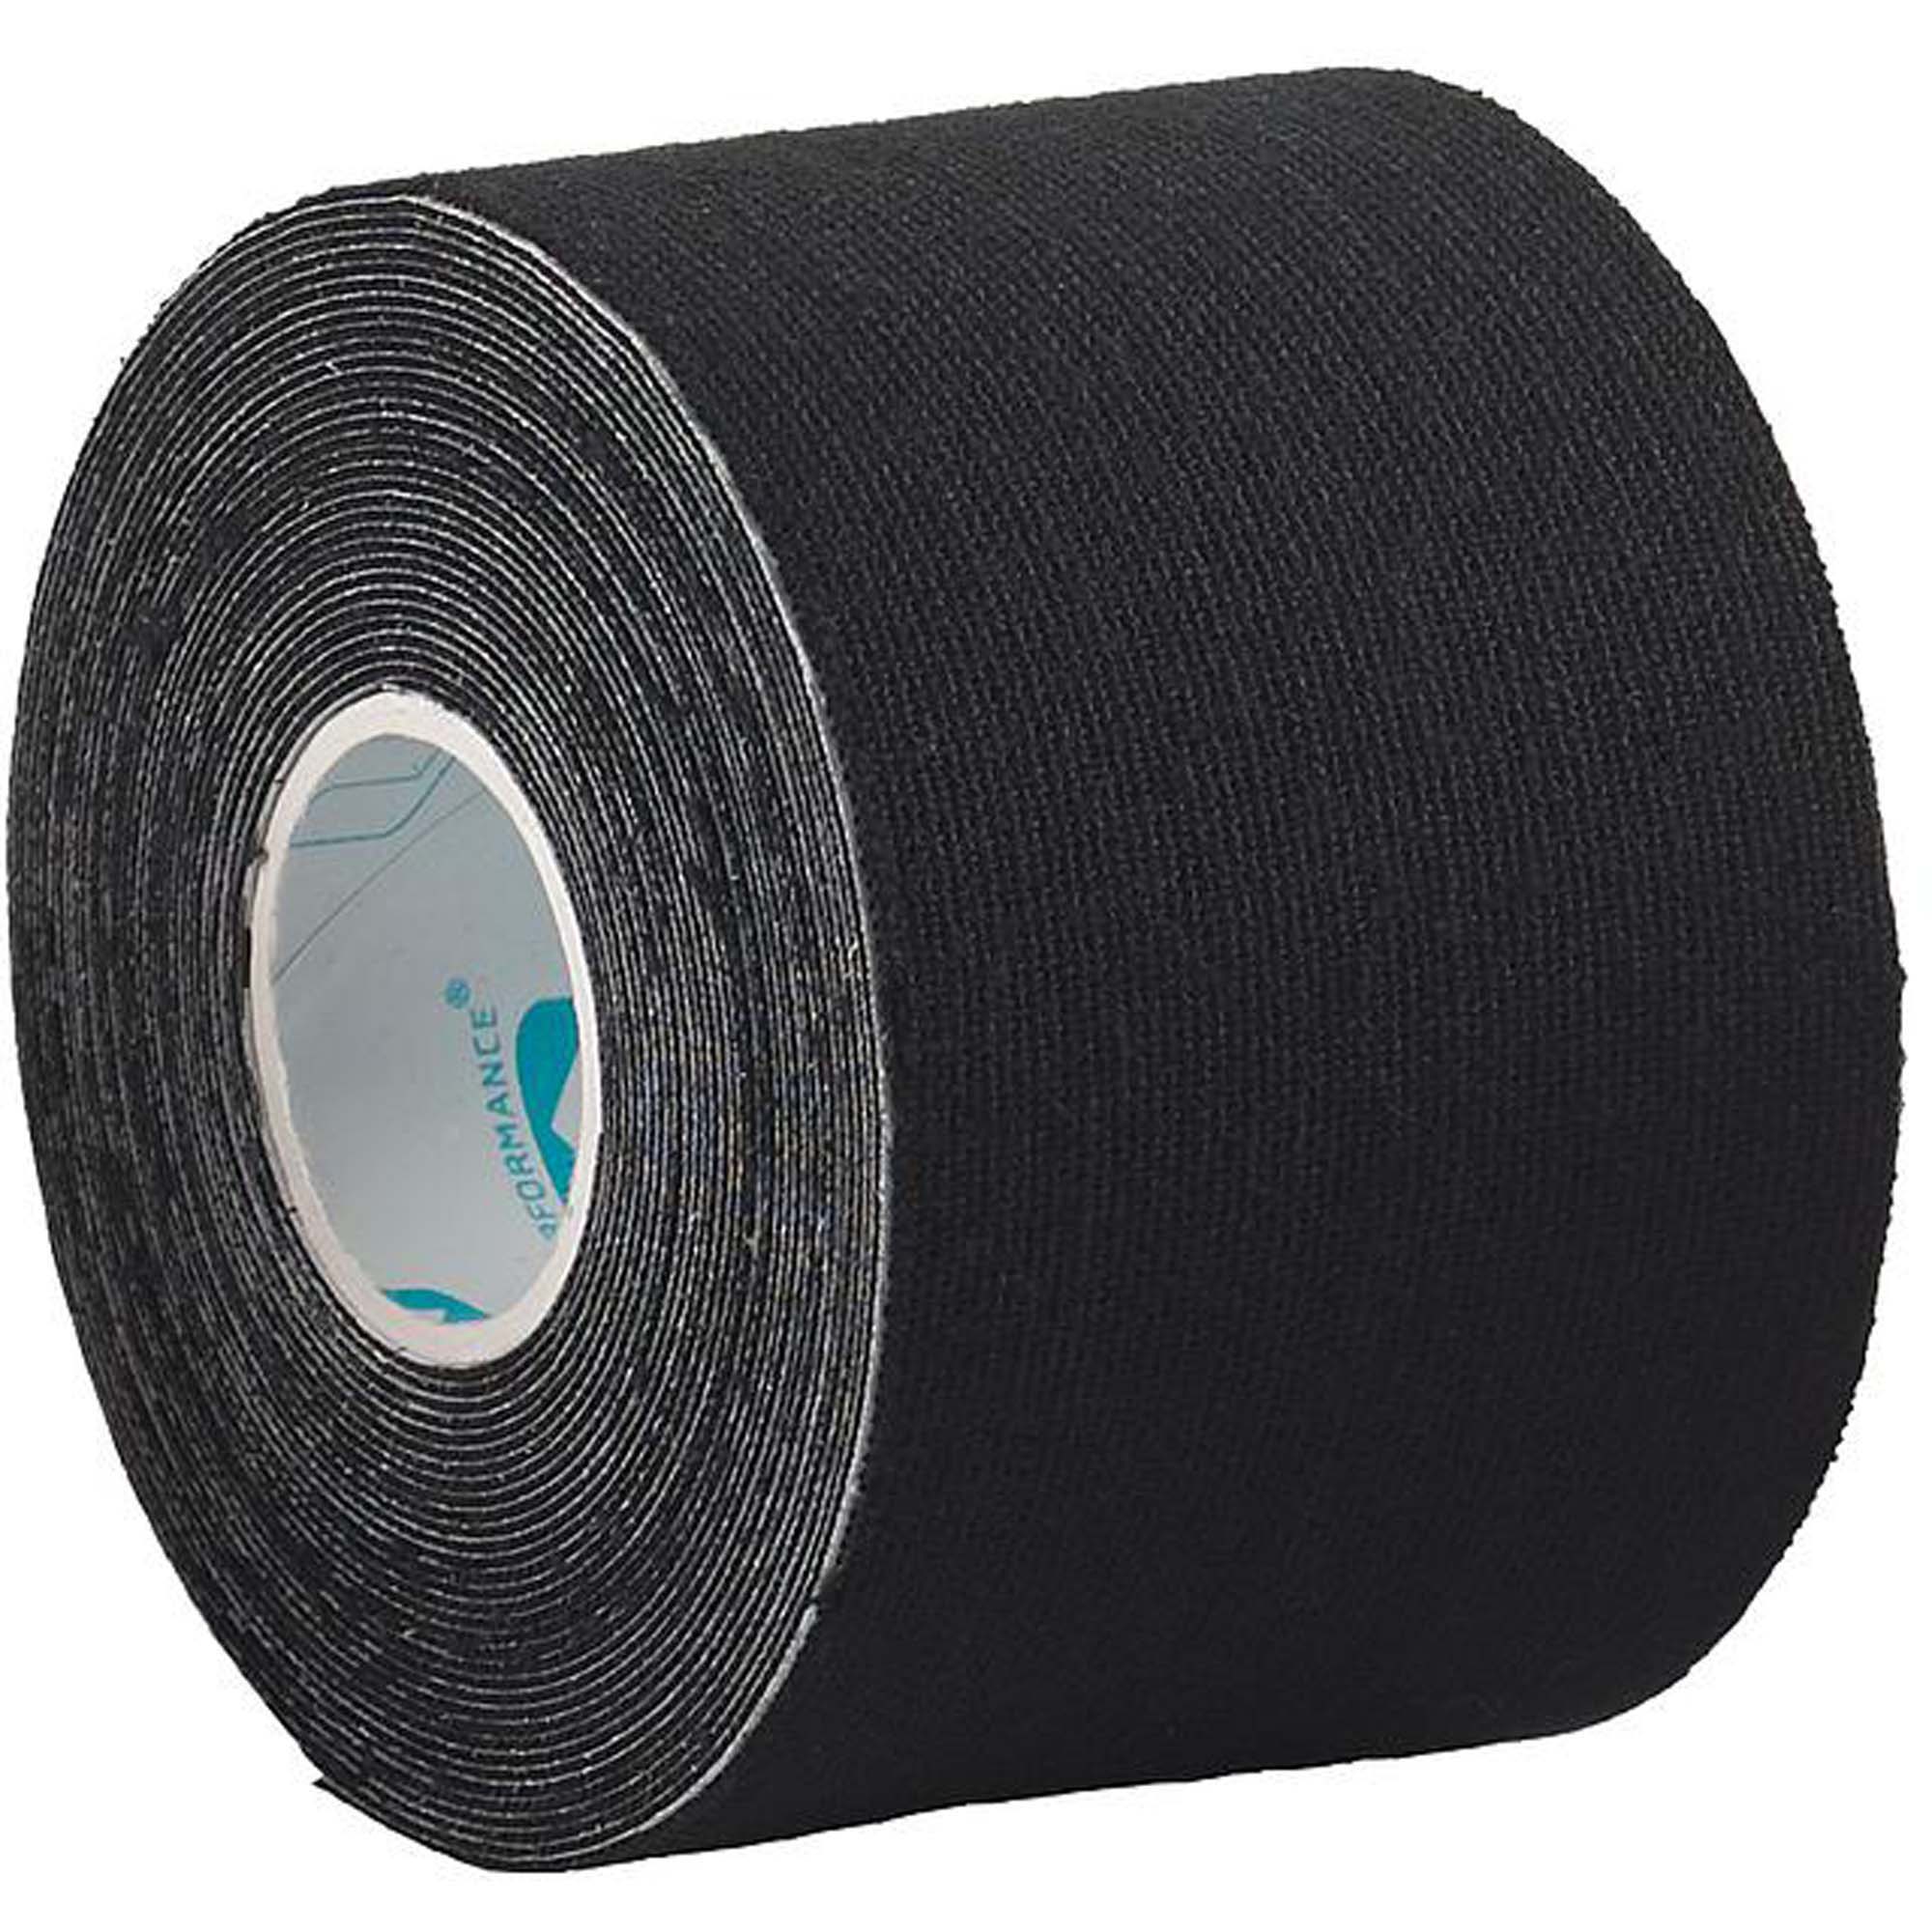 Ultimate Performance Kinesiology Tape Roll Joint & Muscle Support